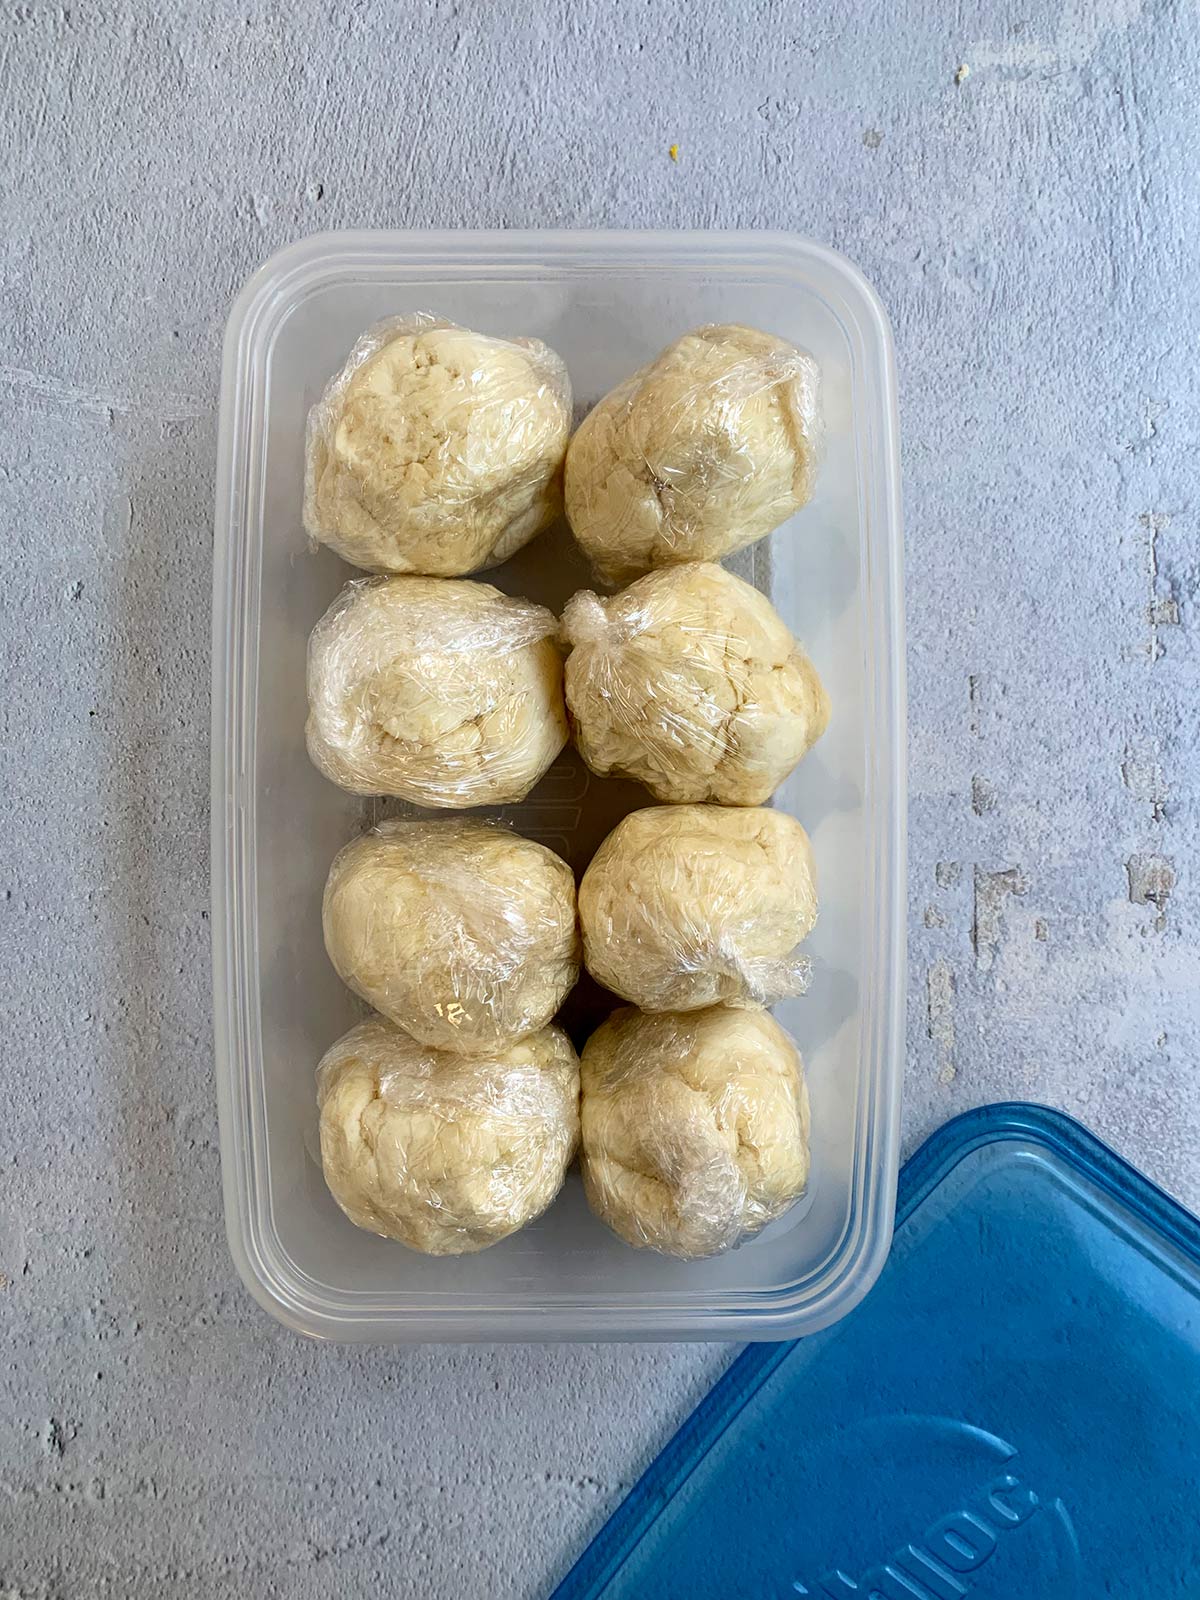 8 dough balls wrapped in plastic and placed in a container ready to refrigerate.